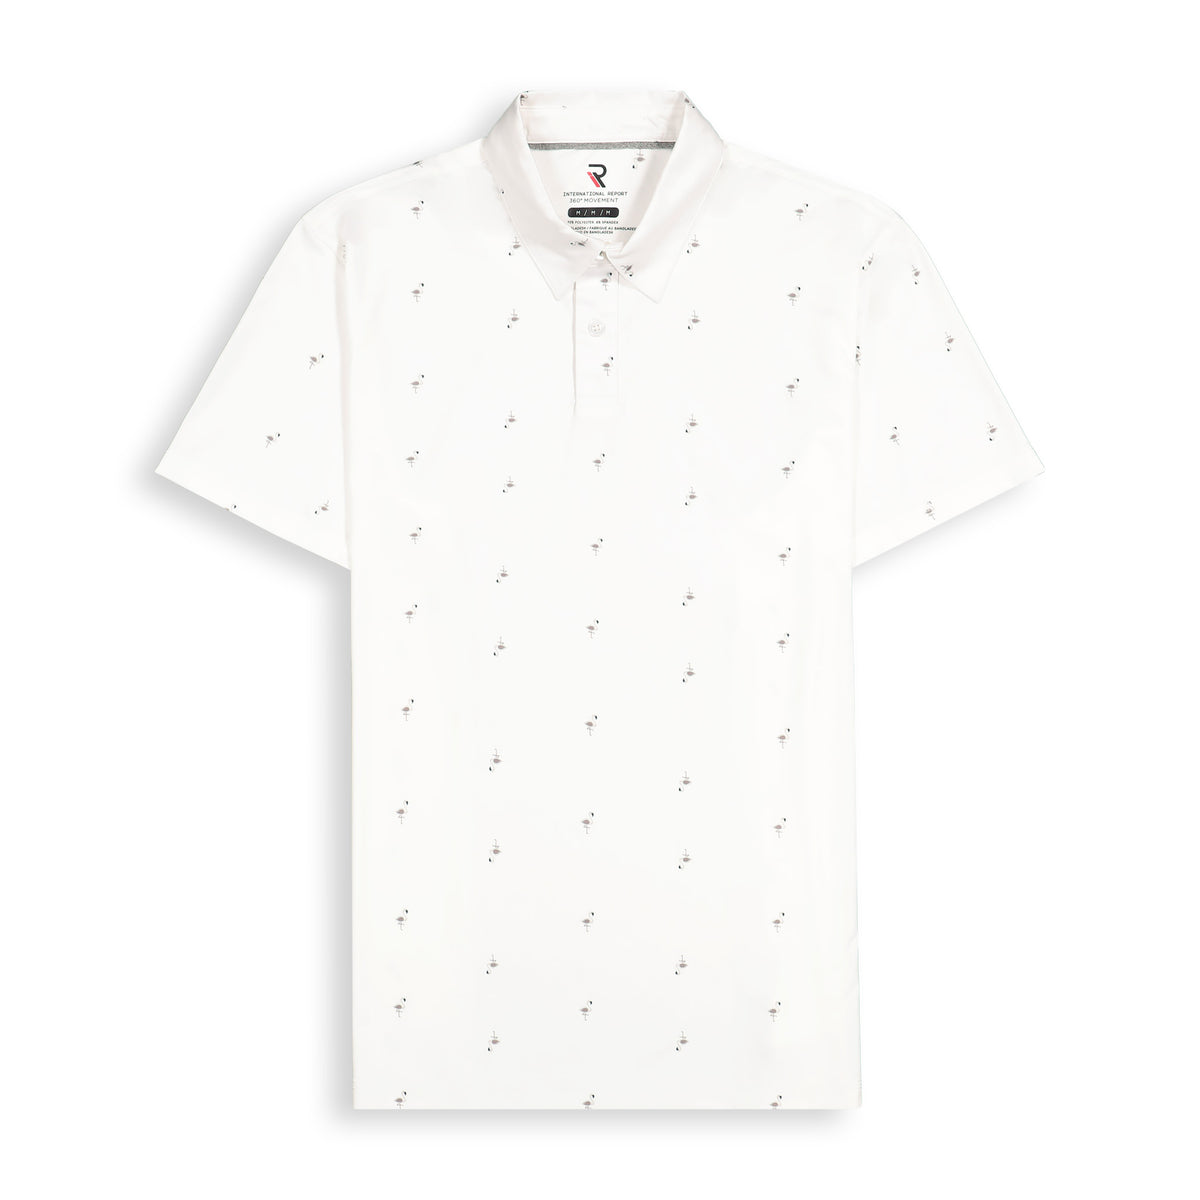 Front View of Short Sleeve Performance Stretch Polo with Flamingo Print in White